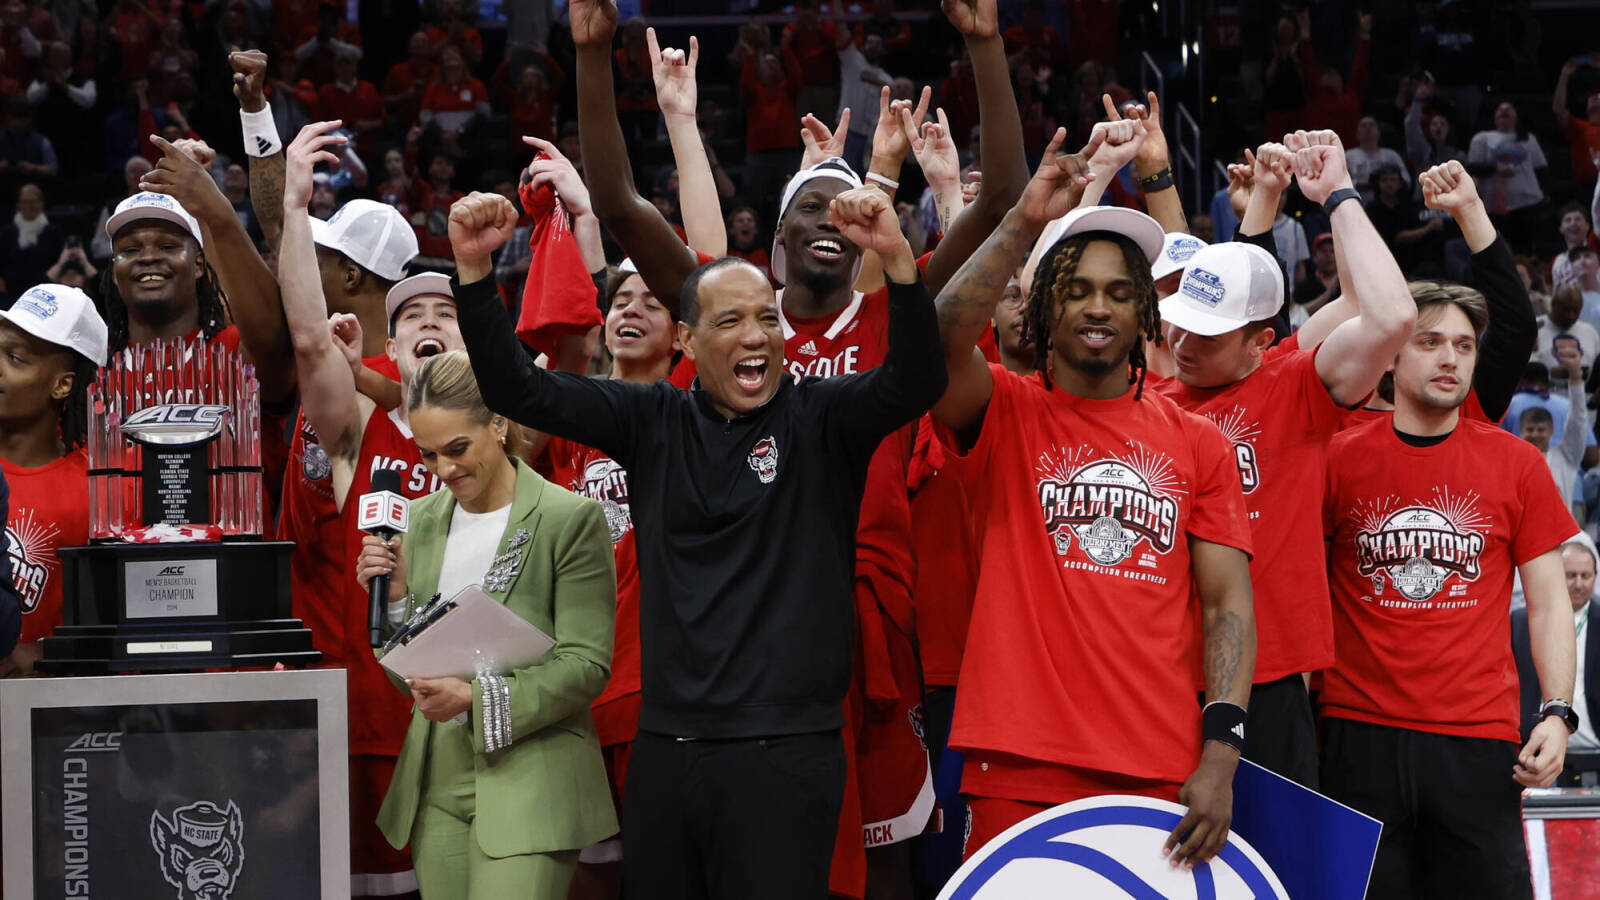 NC State upsets North Carolina to win ACC title, capping off miraculous